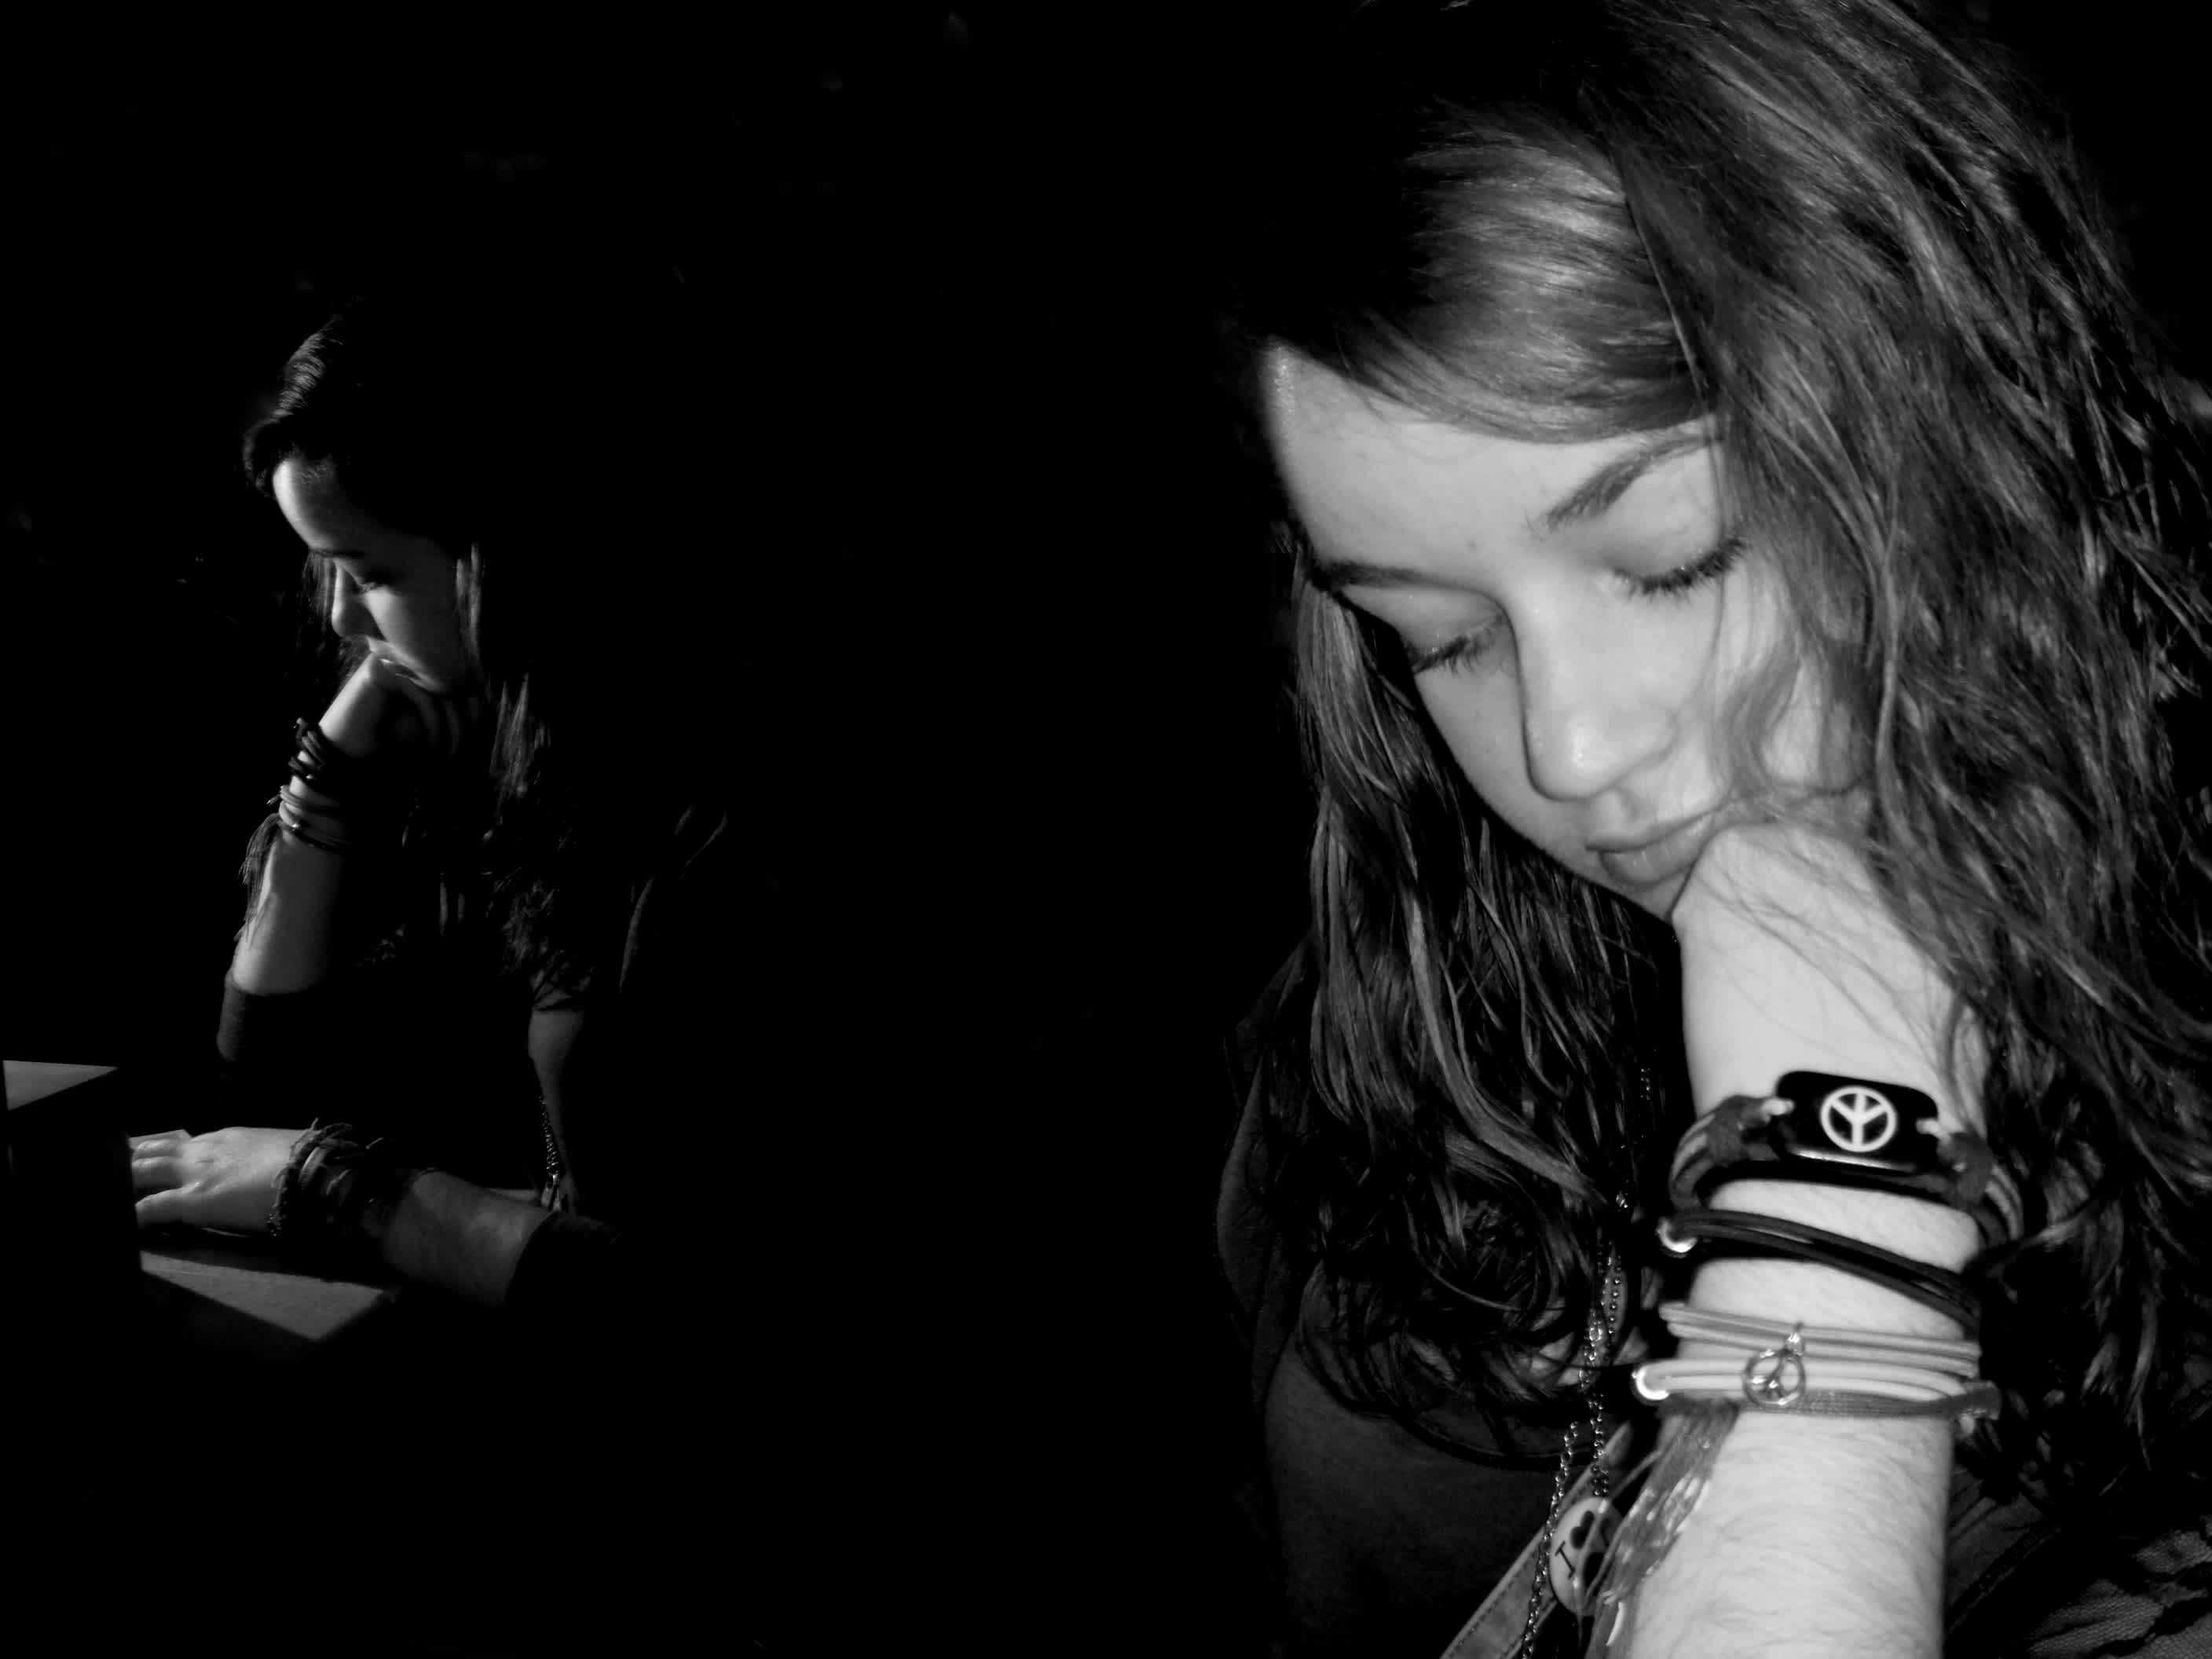 Girl with bracelets looking thoughtful